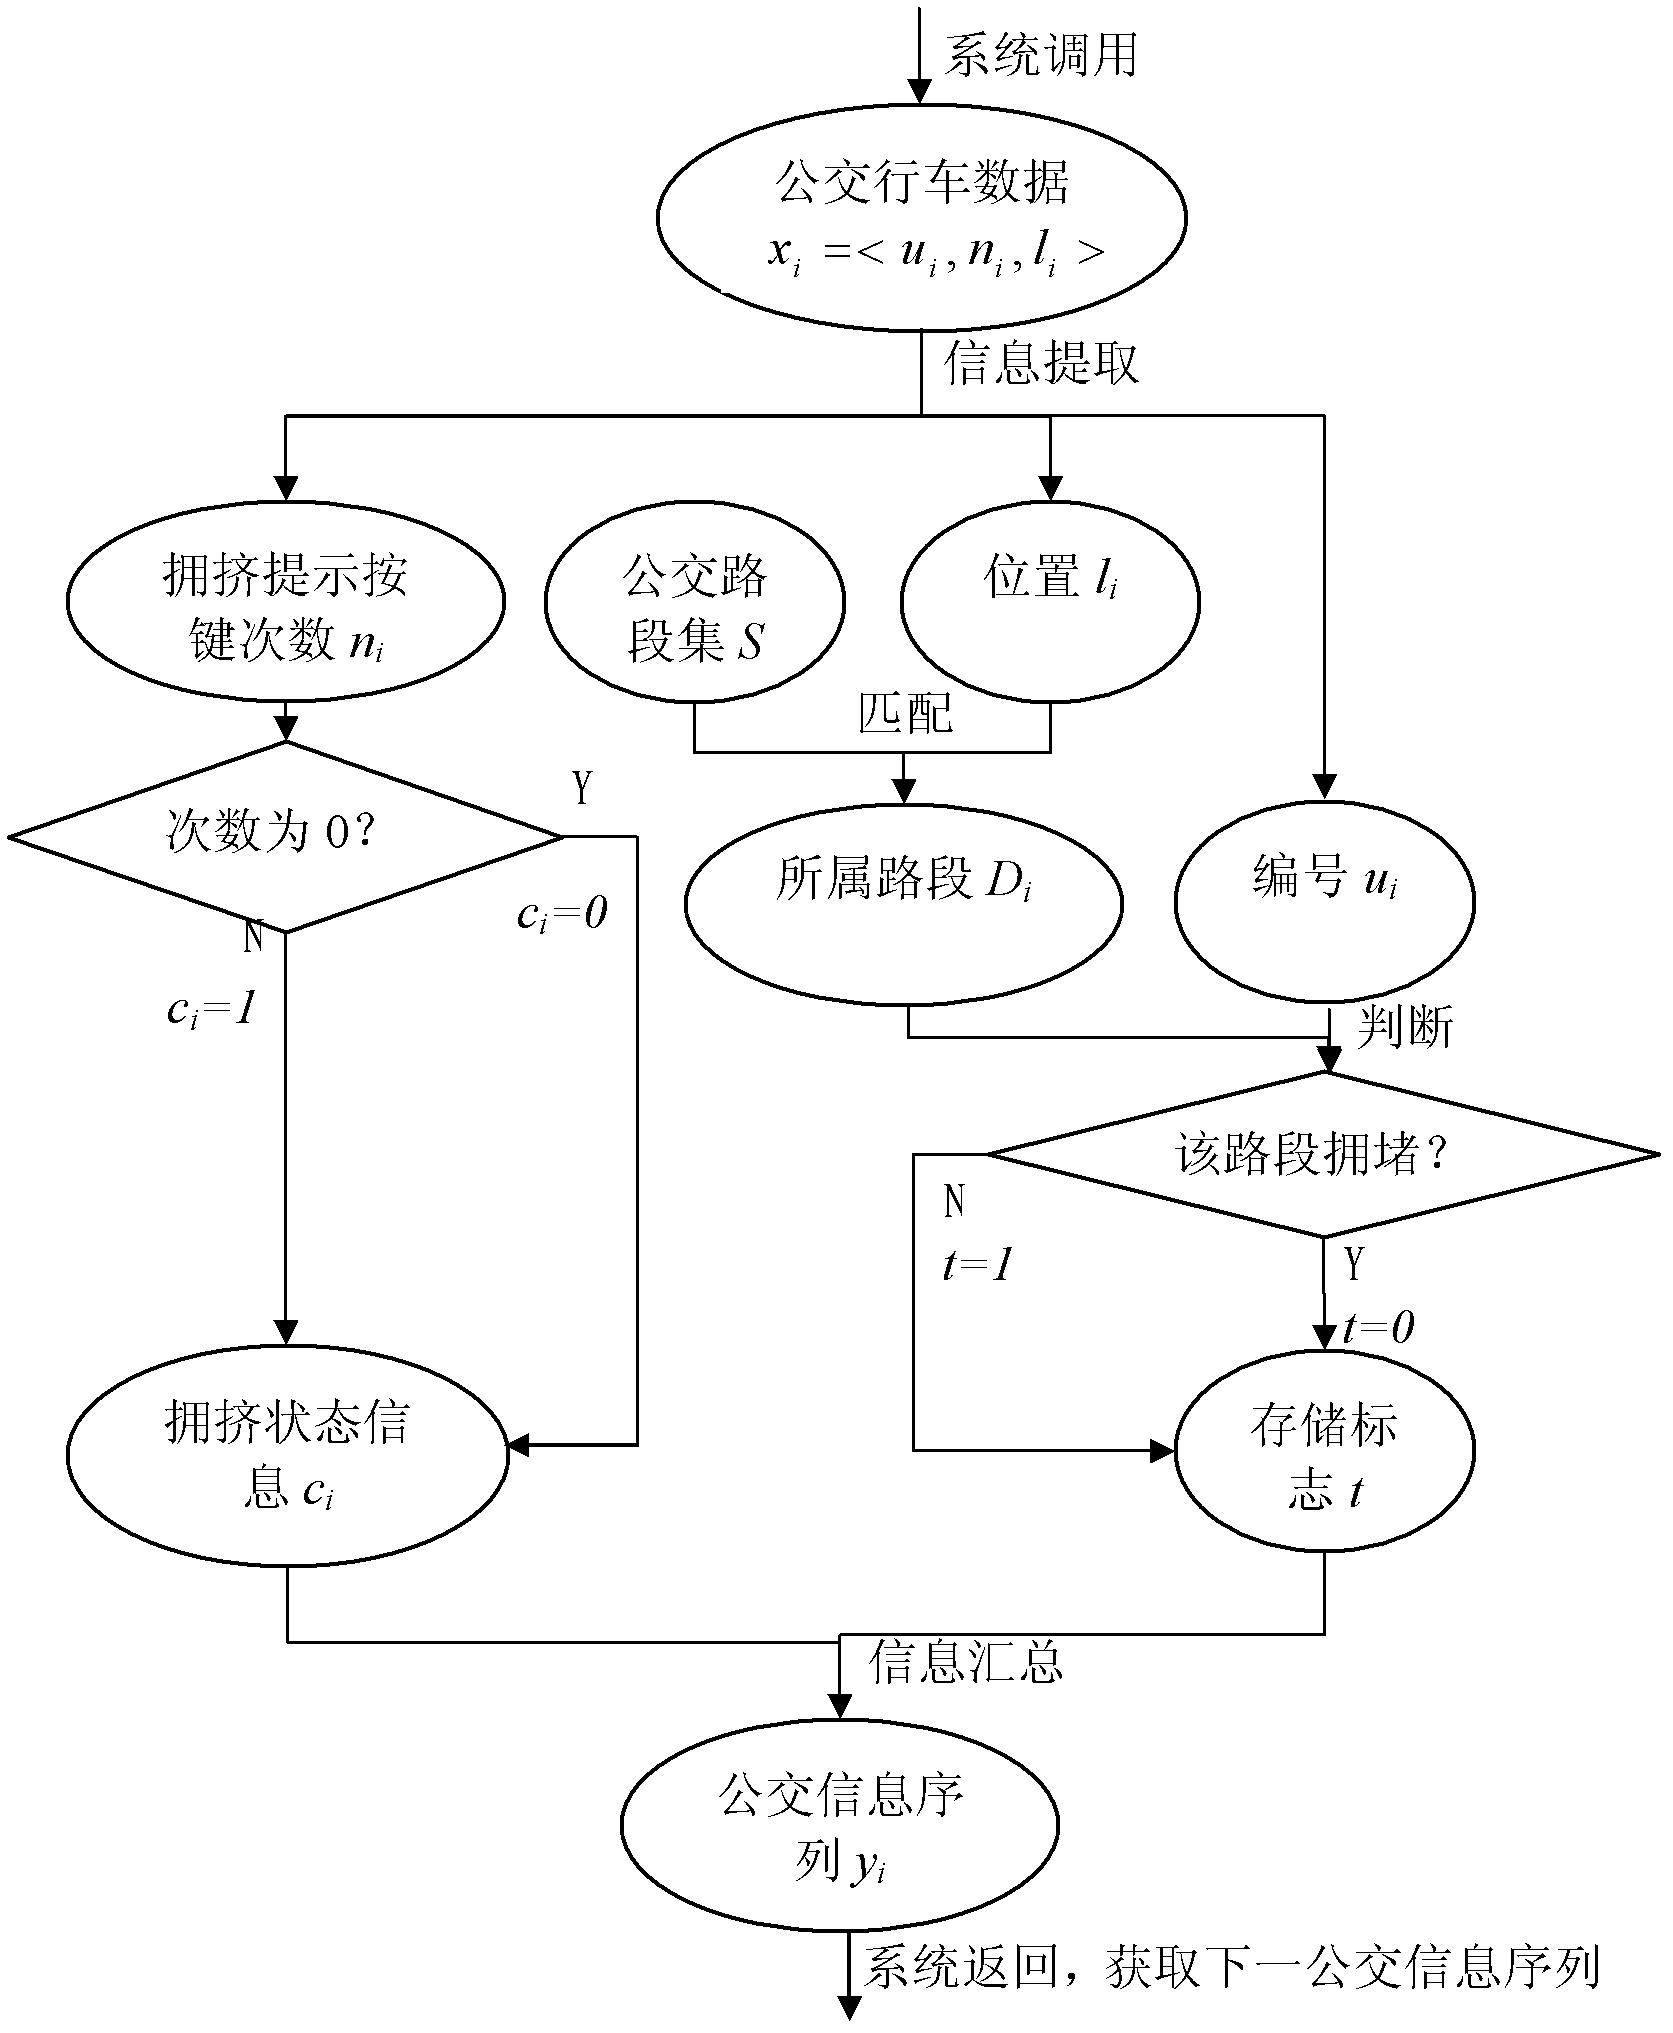 Method for collecting public traffic congestion status information in real time